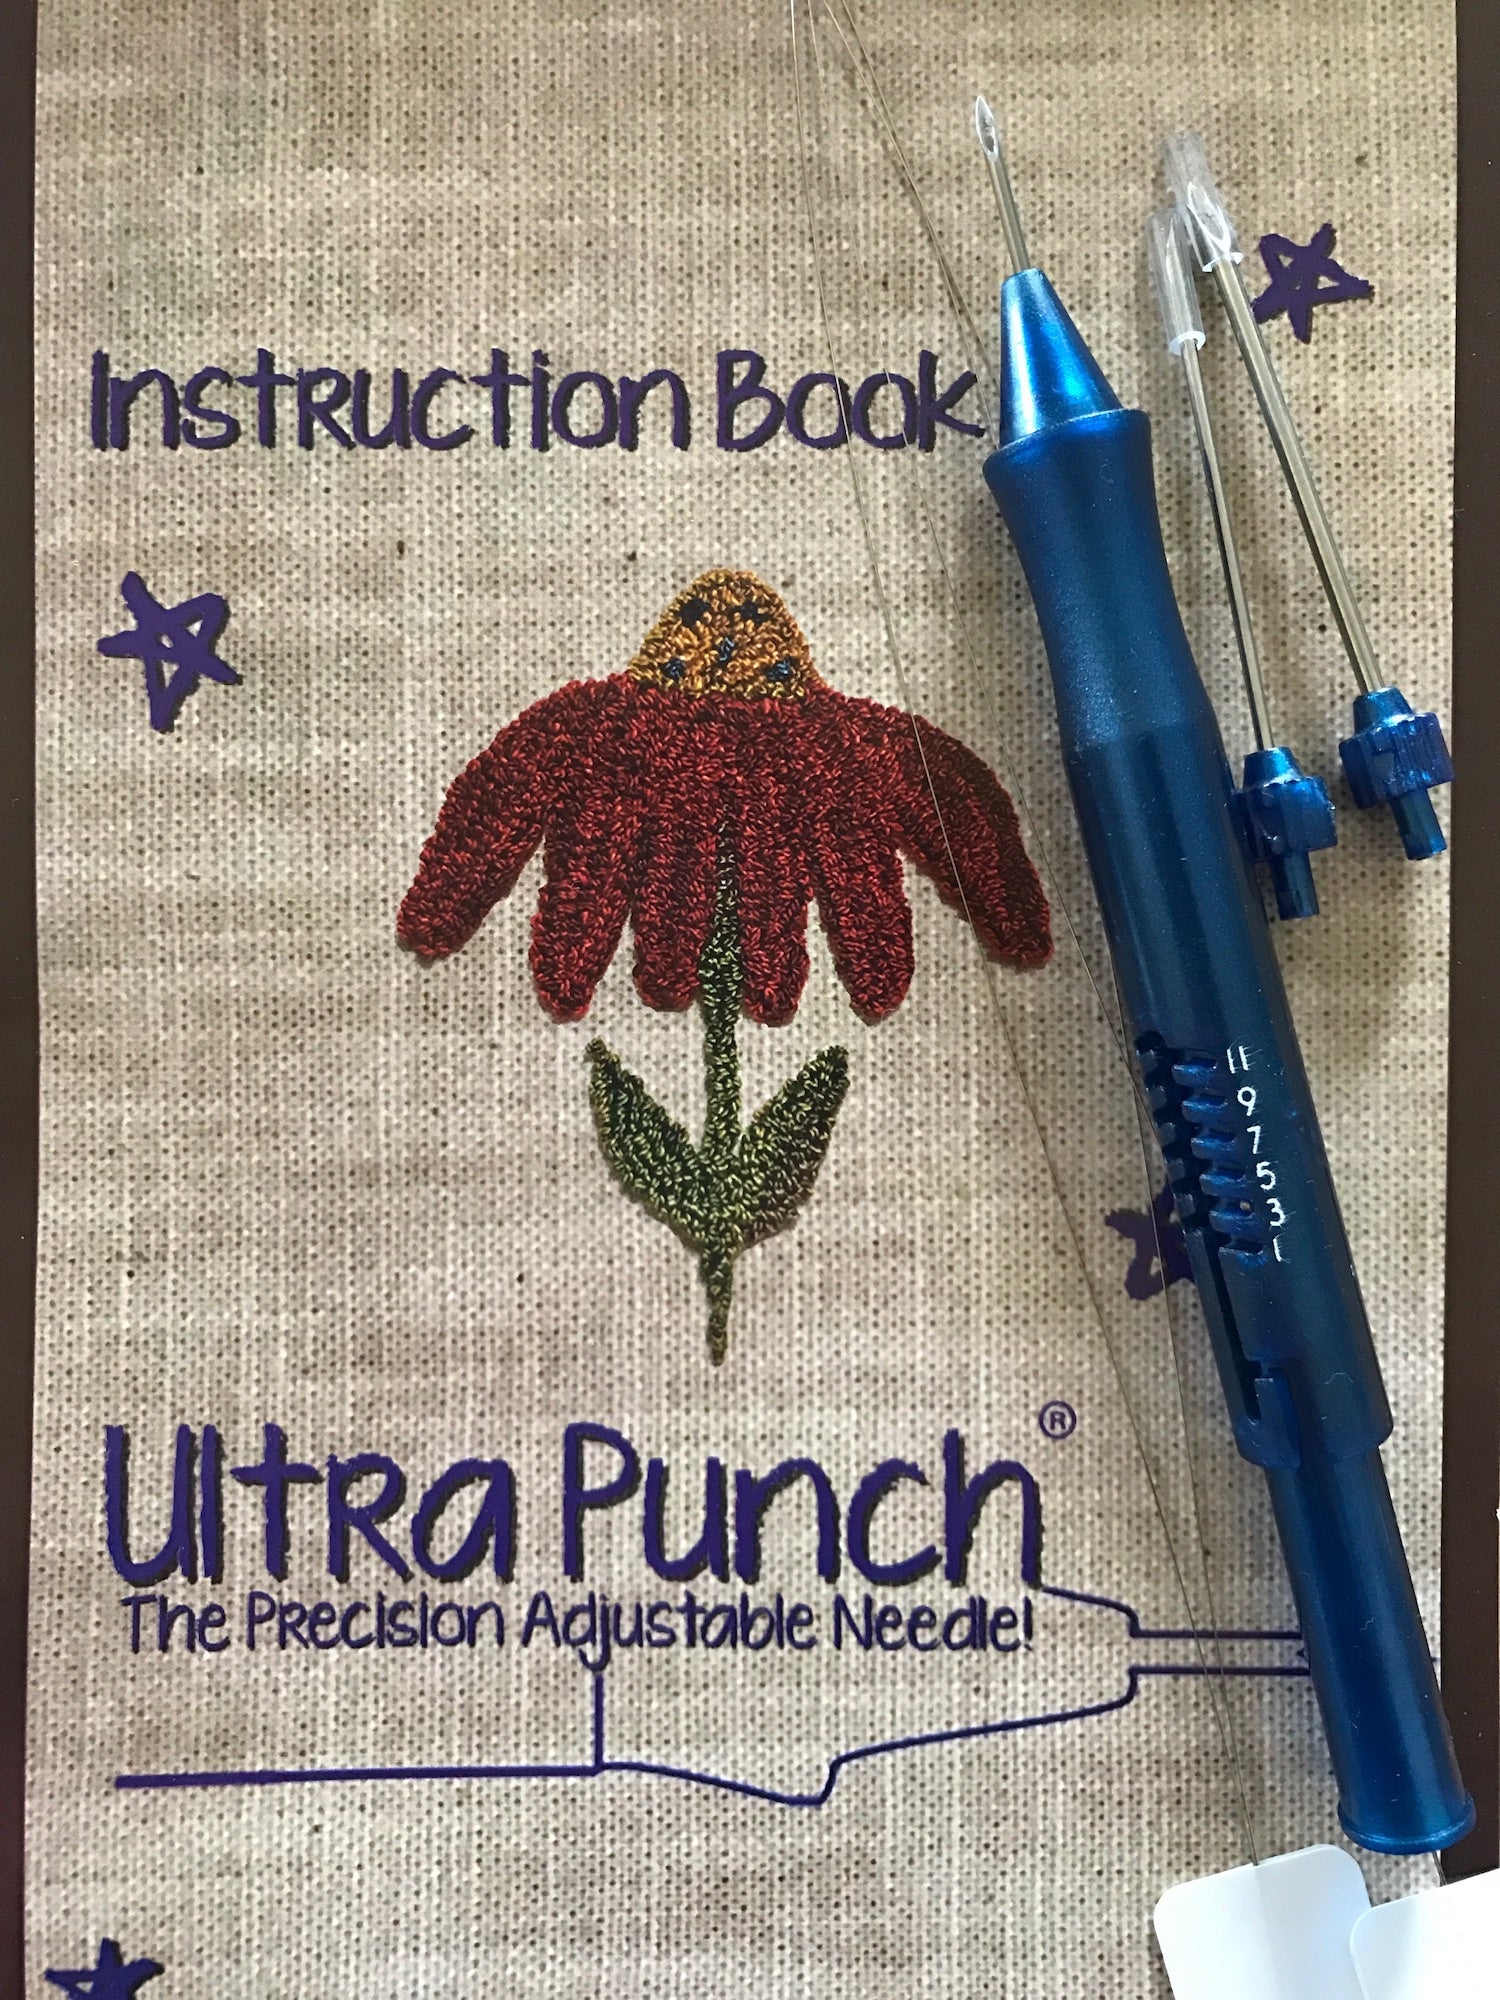 Ultra Punch Needle Tool